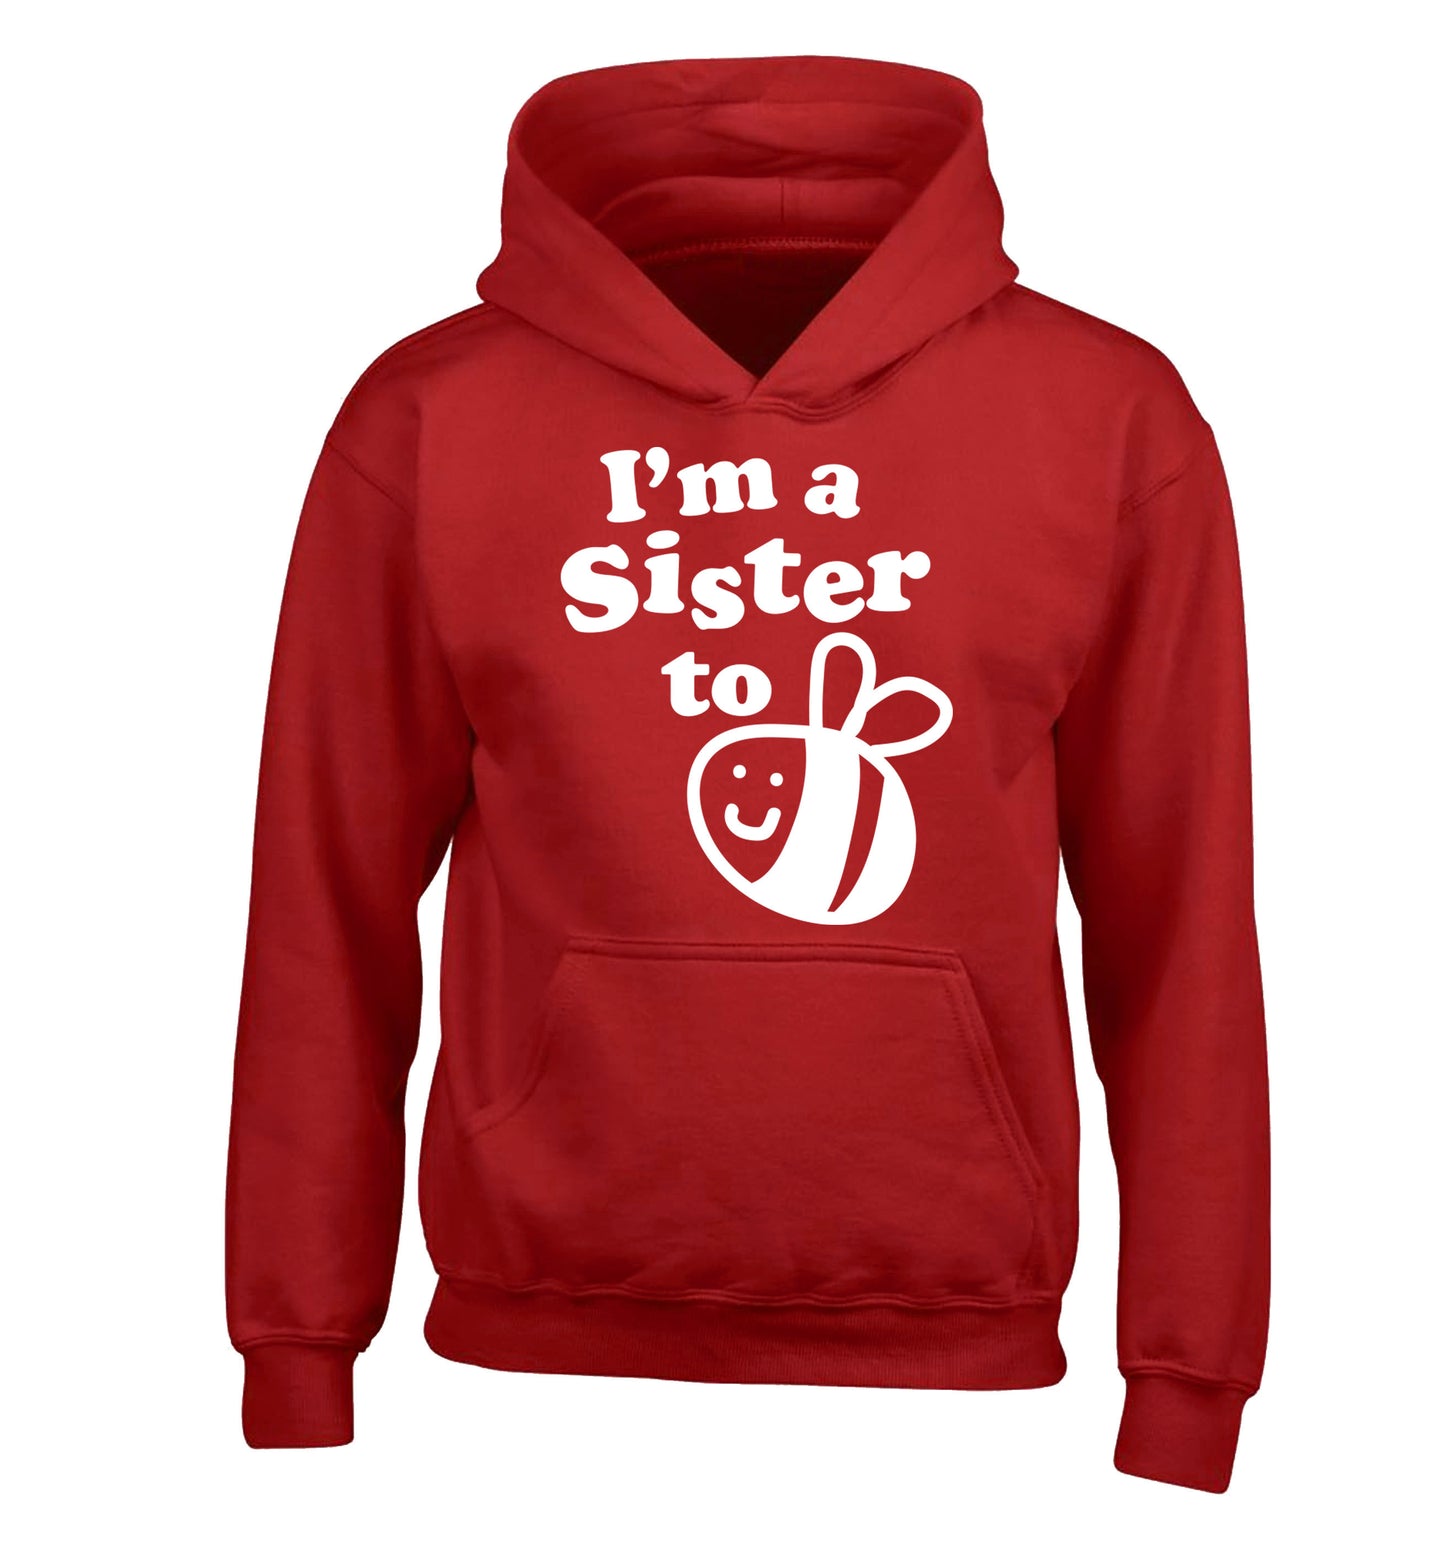 I'm a sister to be children's red hoodie 12-14 Years